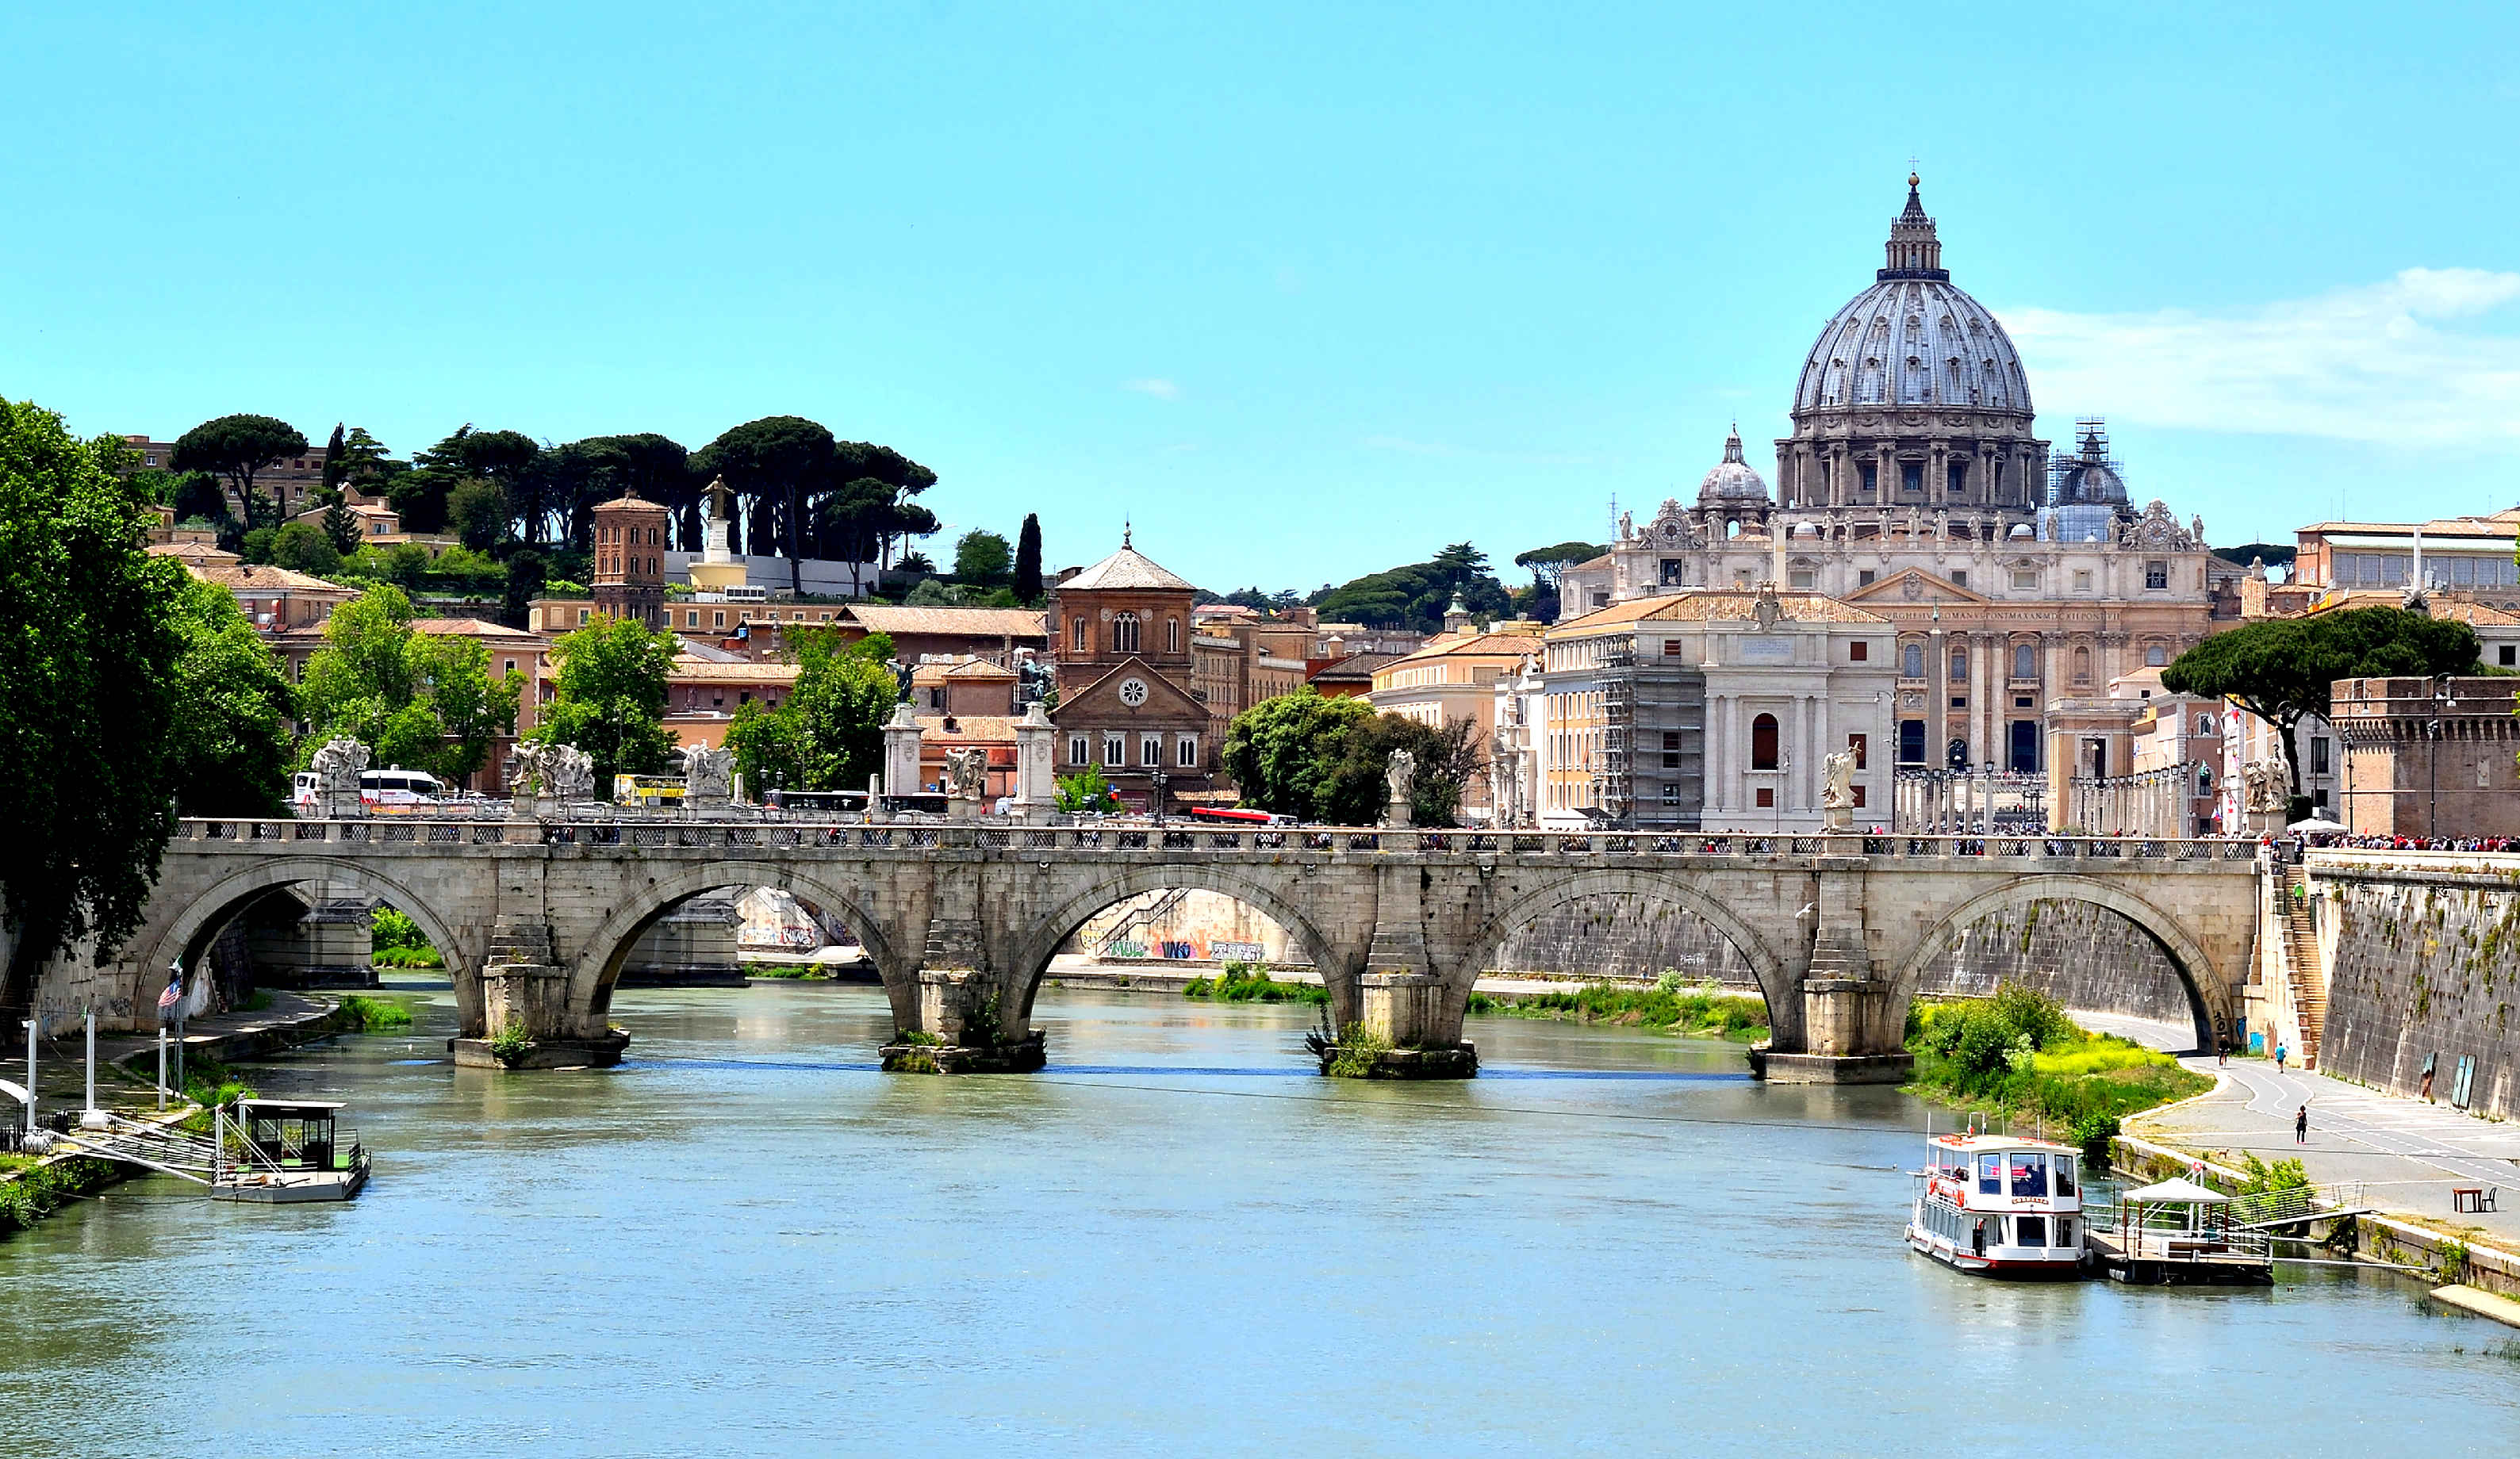 The Vatican City as see from the River Tiber